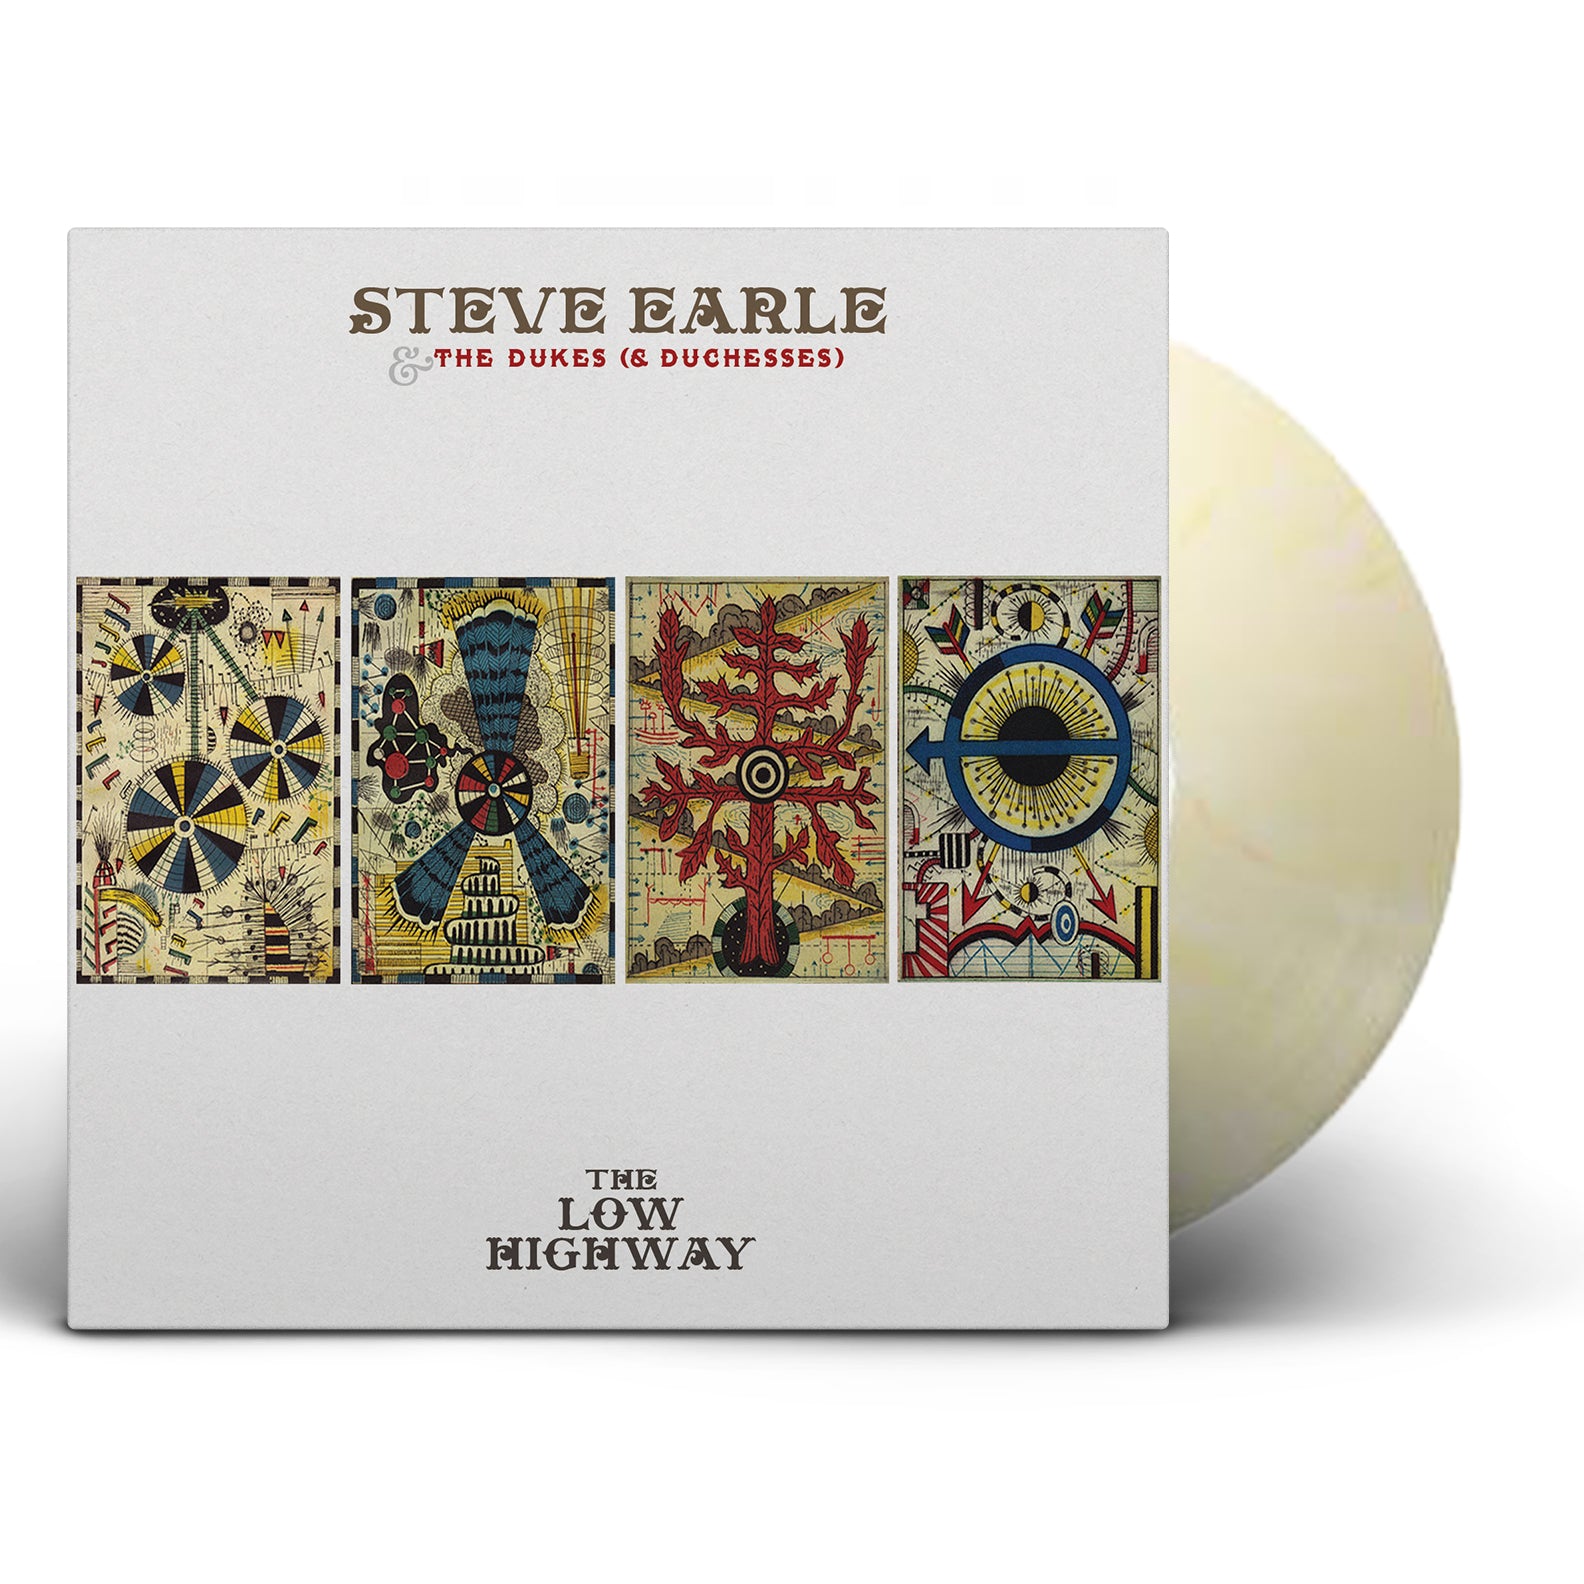 Steve Earle & The Dukes (& Duchesses) - The Low Highway [Limited Edition Color Vinyl]